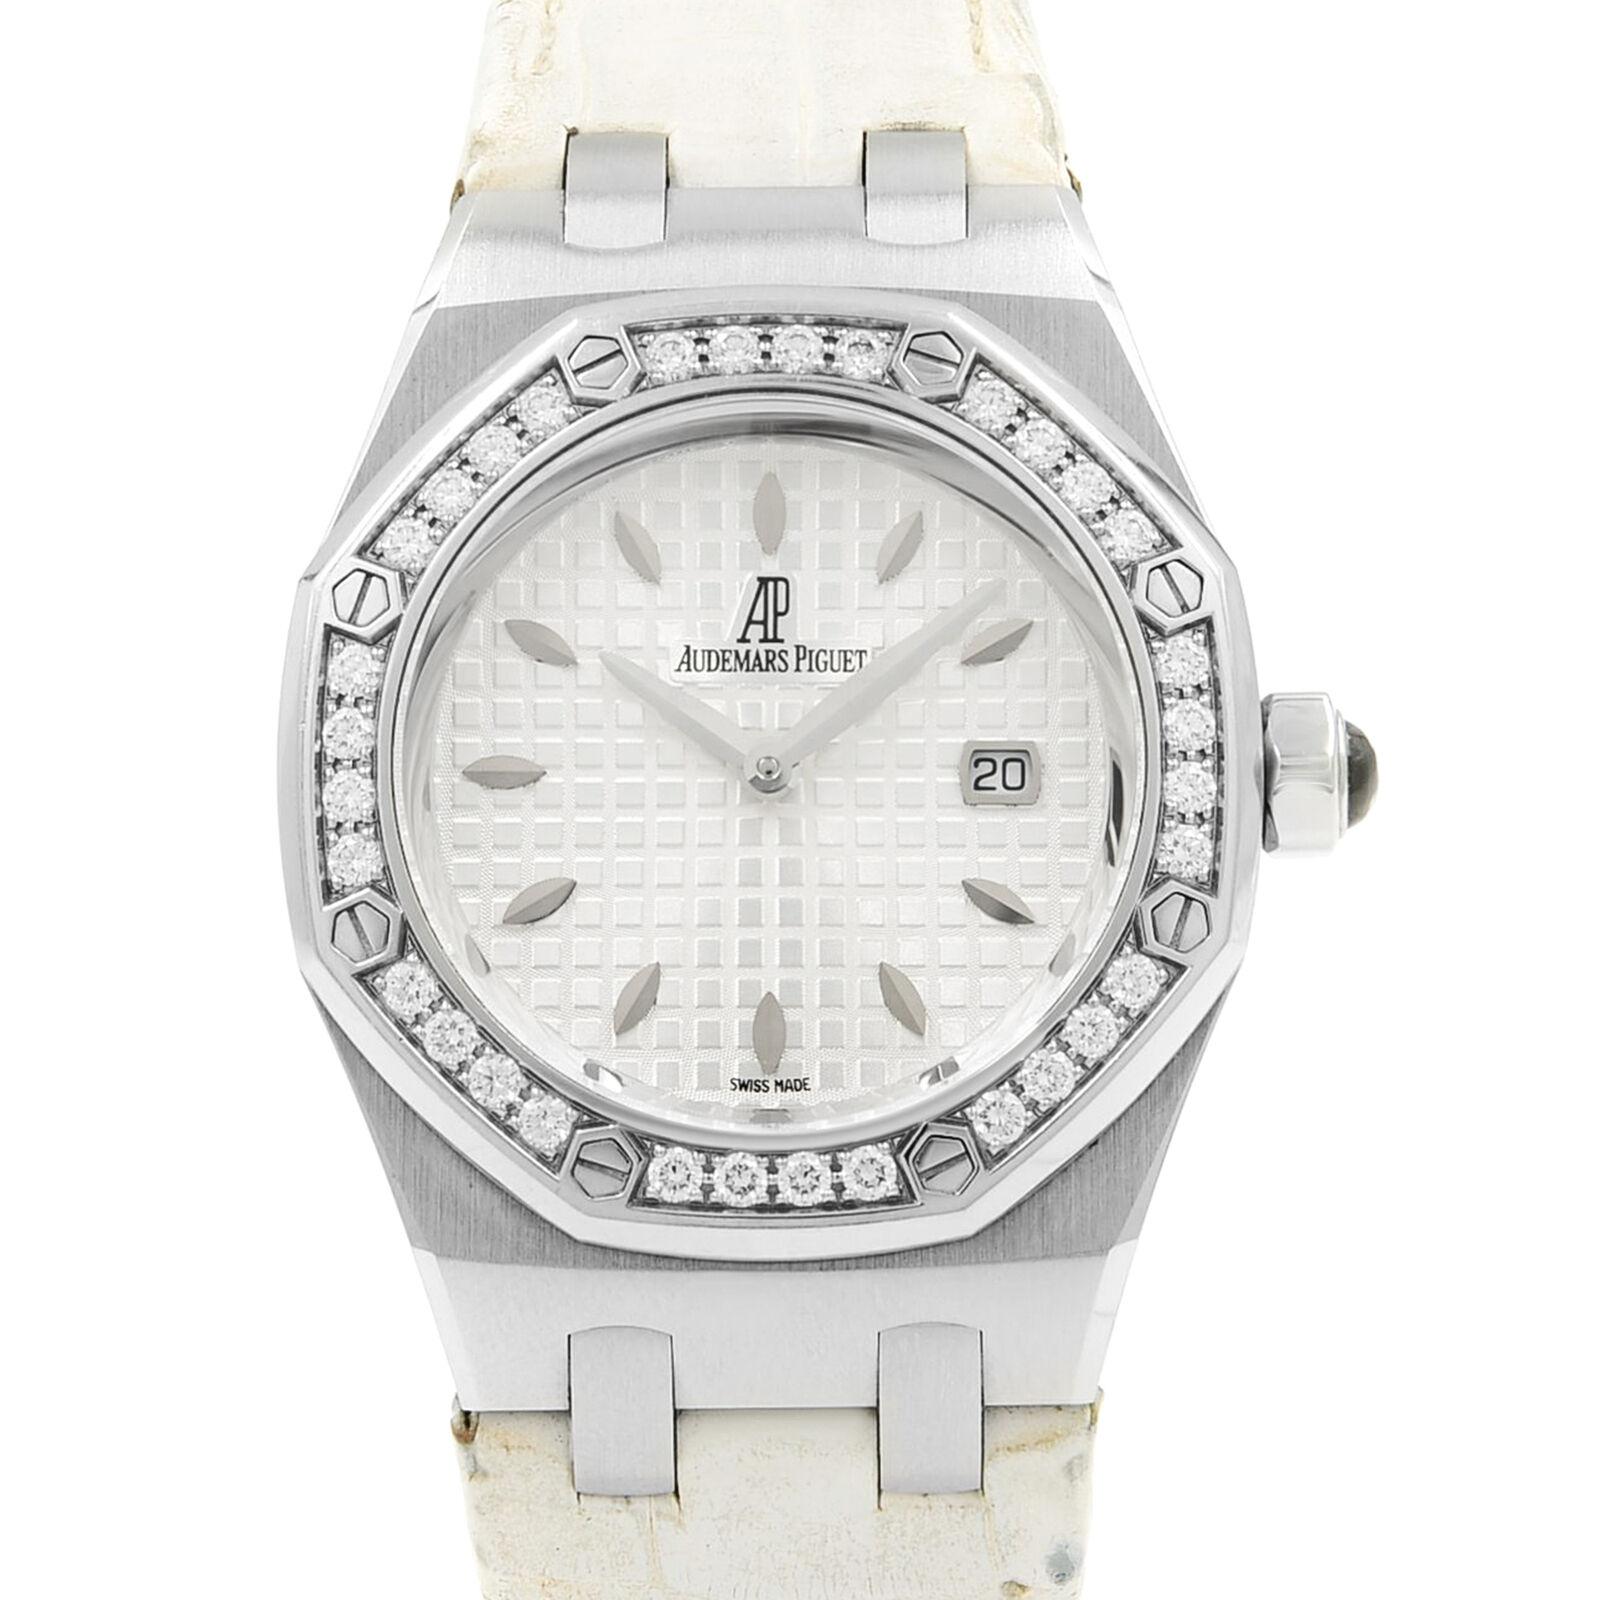 This pre-owned Audemars Piguet Royal Oak 67621ST.ZZ.D012CR.02 is a beautiful Ladies timepiece that is powered by a quartz movement which is cased in a stainless steel case. It has a round shape face, date, diamonds dial and has hand sticks style